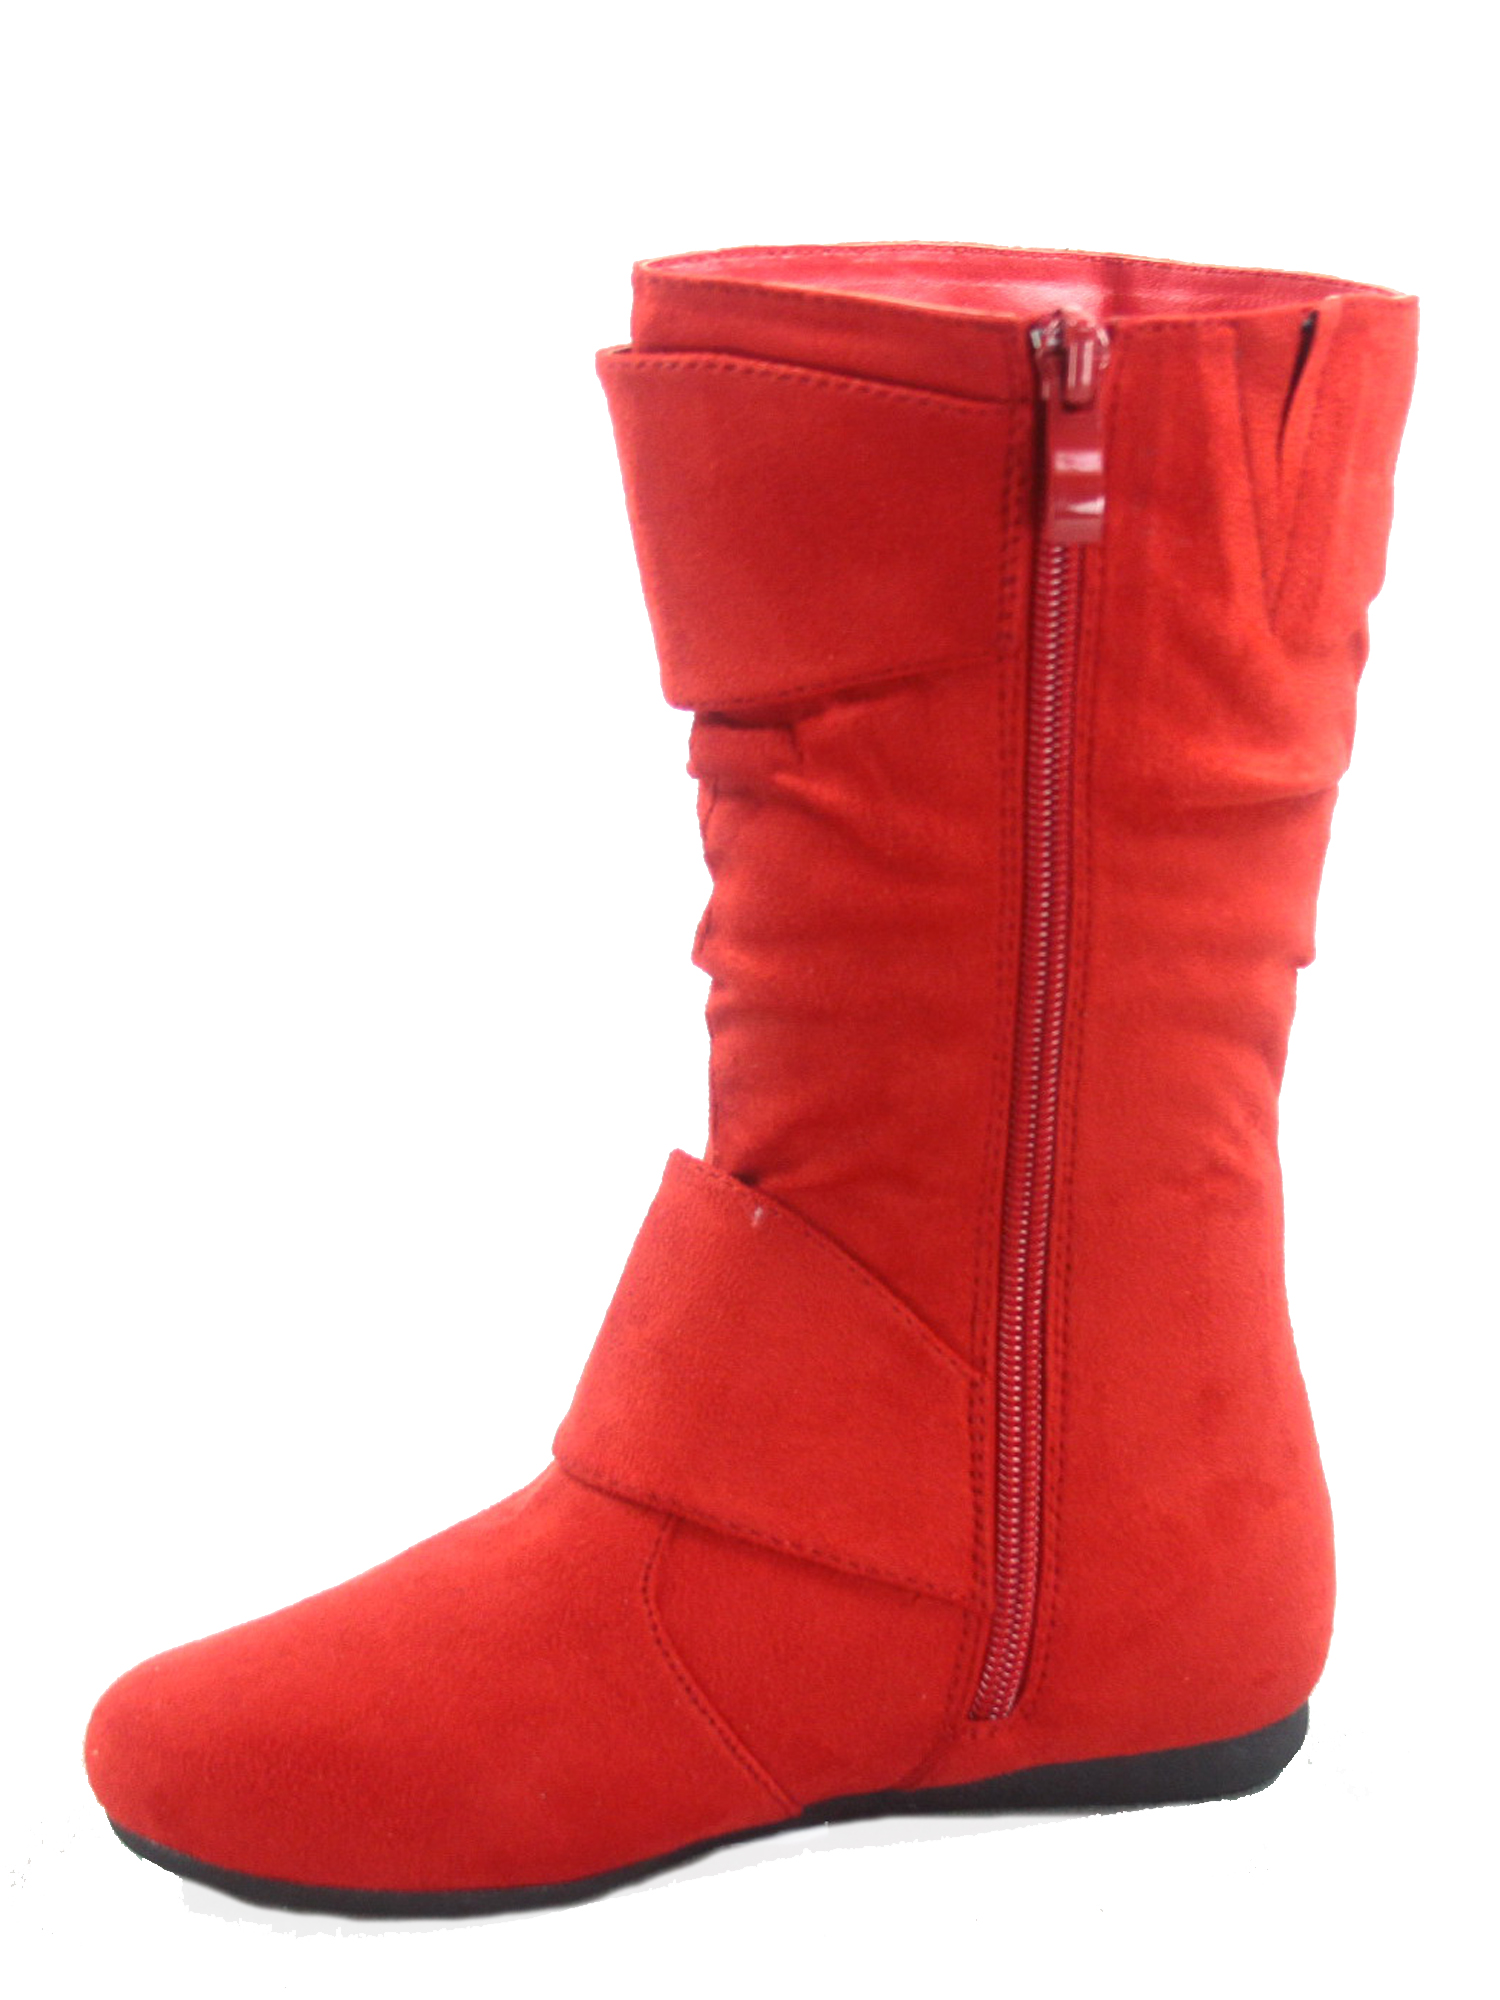 Klein-70 Girls Kid's Causal Flat Heel Buckles Zipper Slouchy Mid Calf Boots Shoes ( Red, 13 ) - image 1 of 2